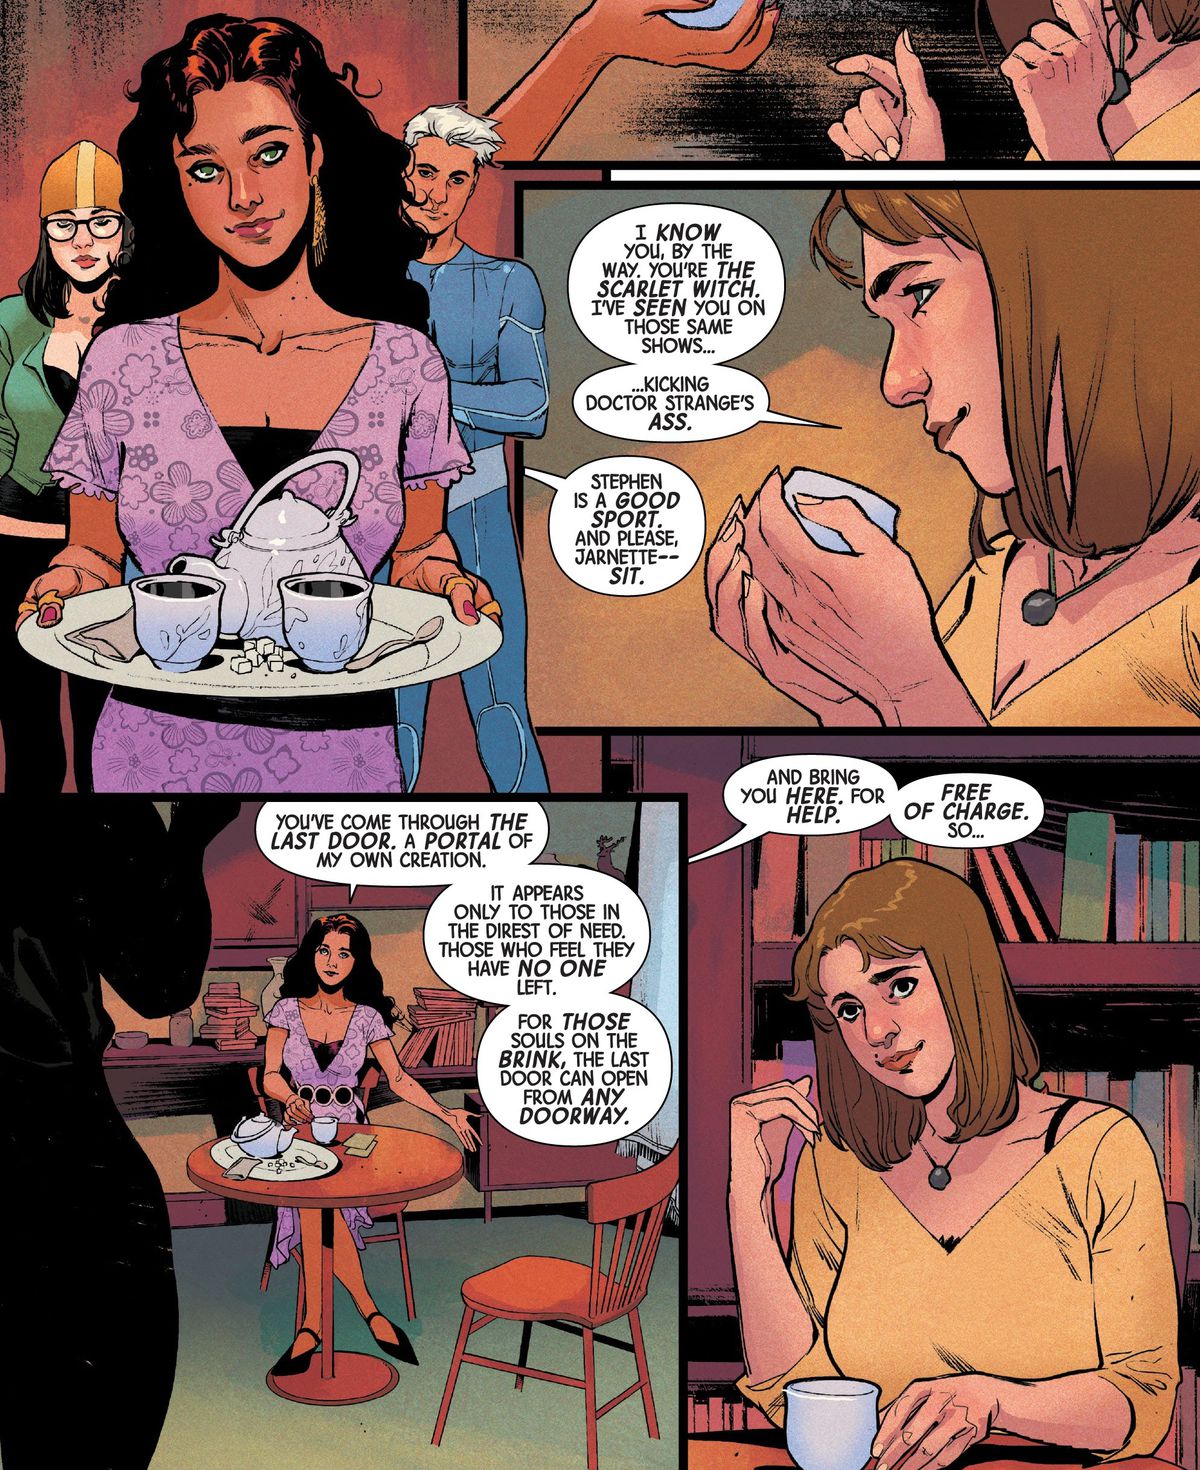 “You have passed through the Last Door.  A portal of my own making,” explains Scarlet Witch as she serves tea to her guests.  “It only appears to those in the most urgent need.  Those who feel they have no one left,” in Scarlet Witch #1. 